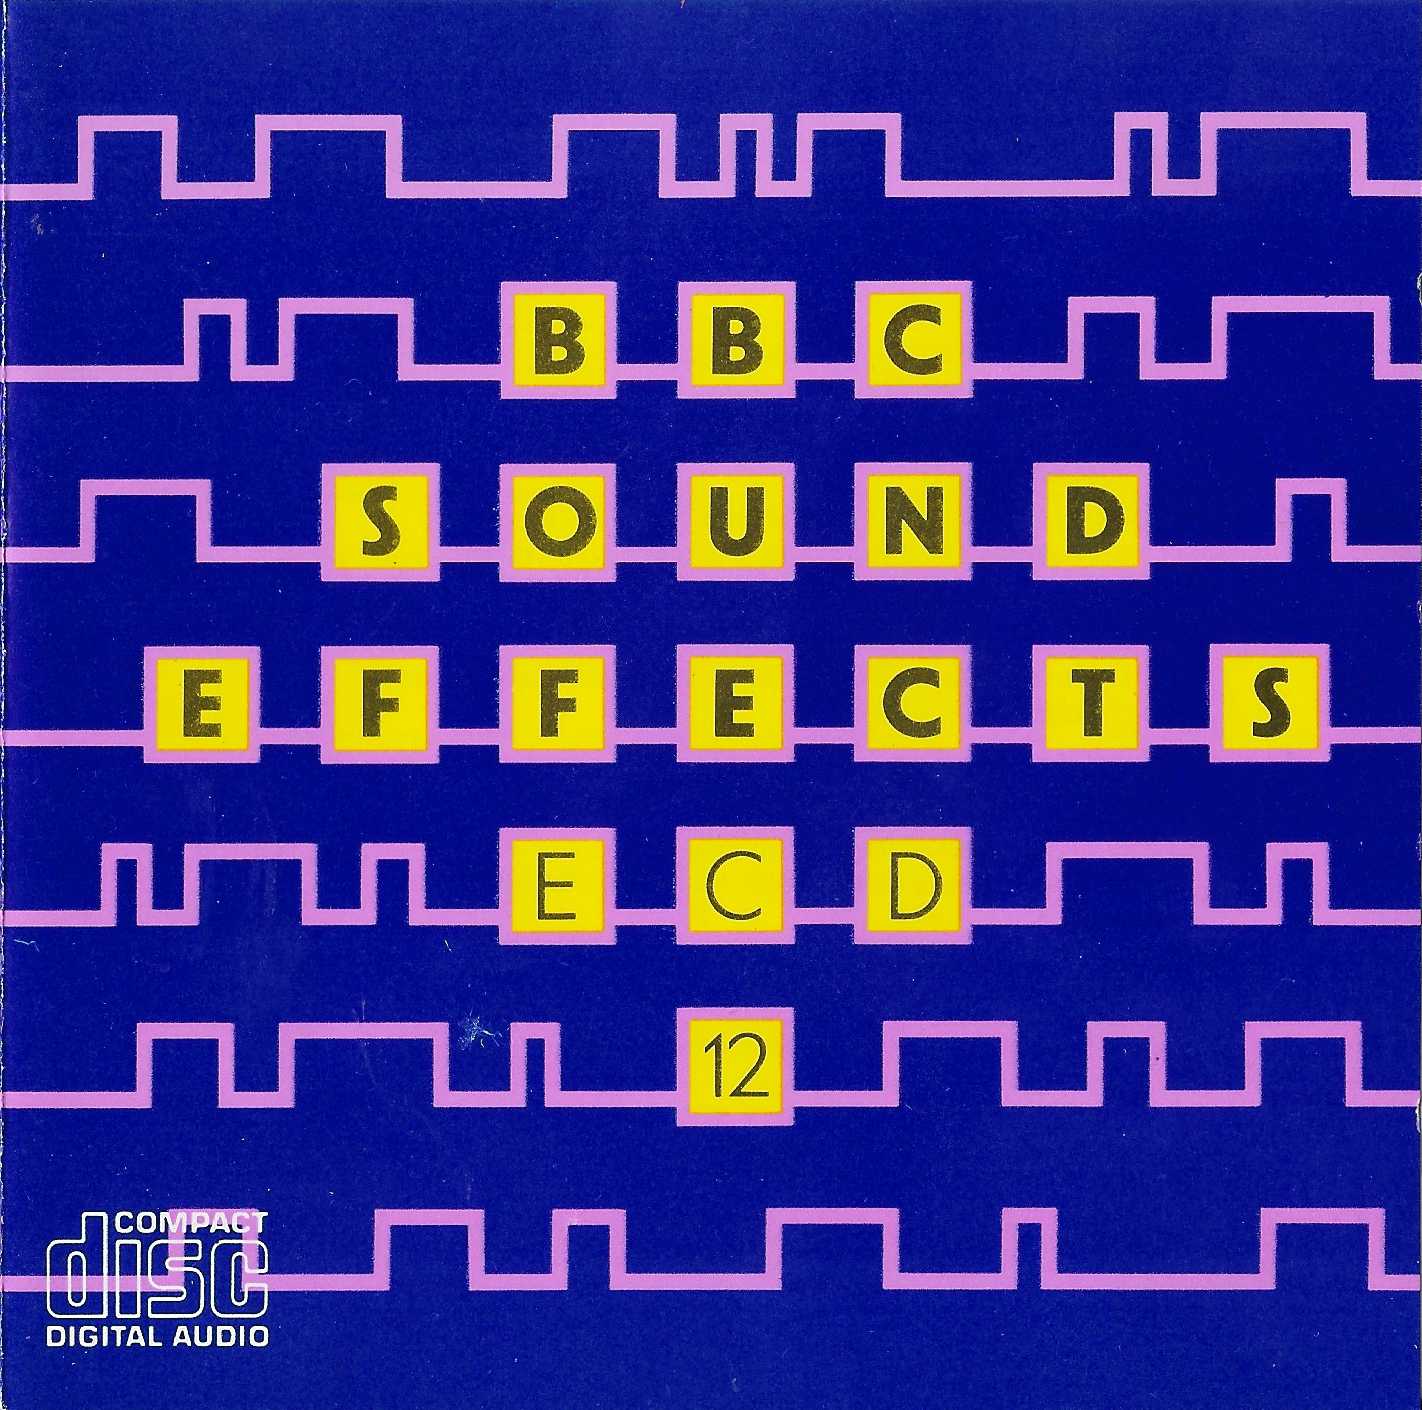 Picture of BBCCD SFX012 British birds by artist Various from the BBC cds - Records and Tapes library